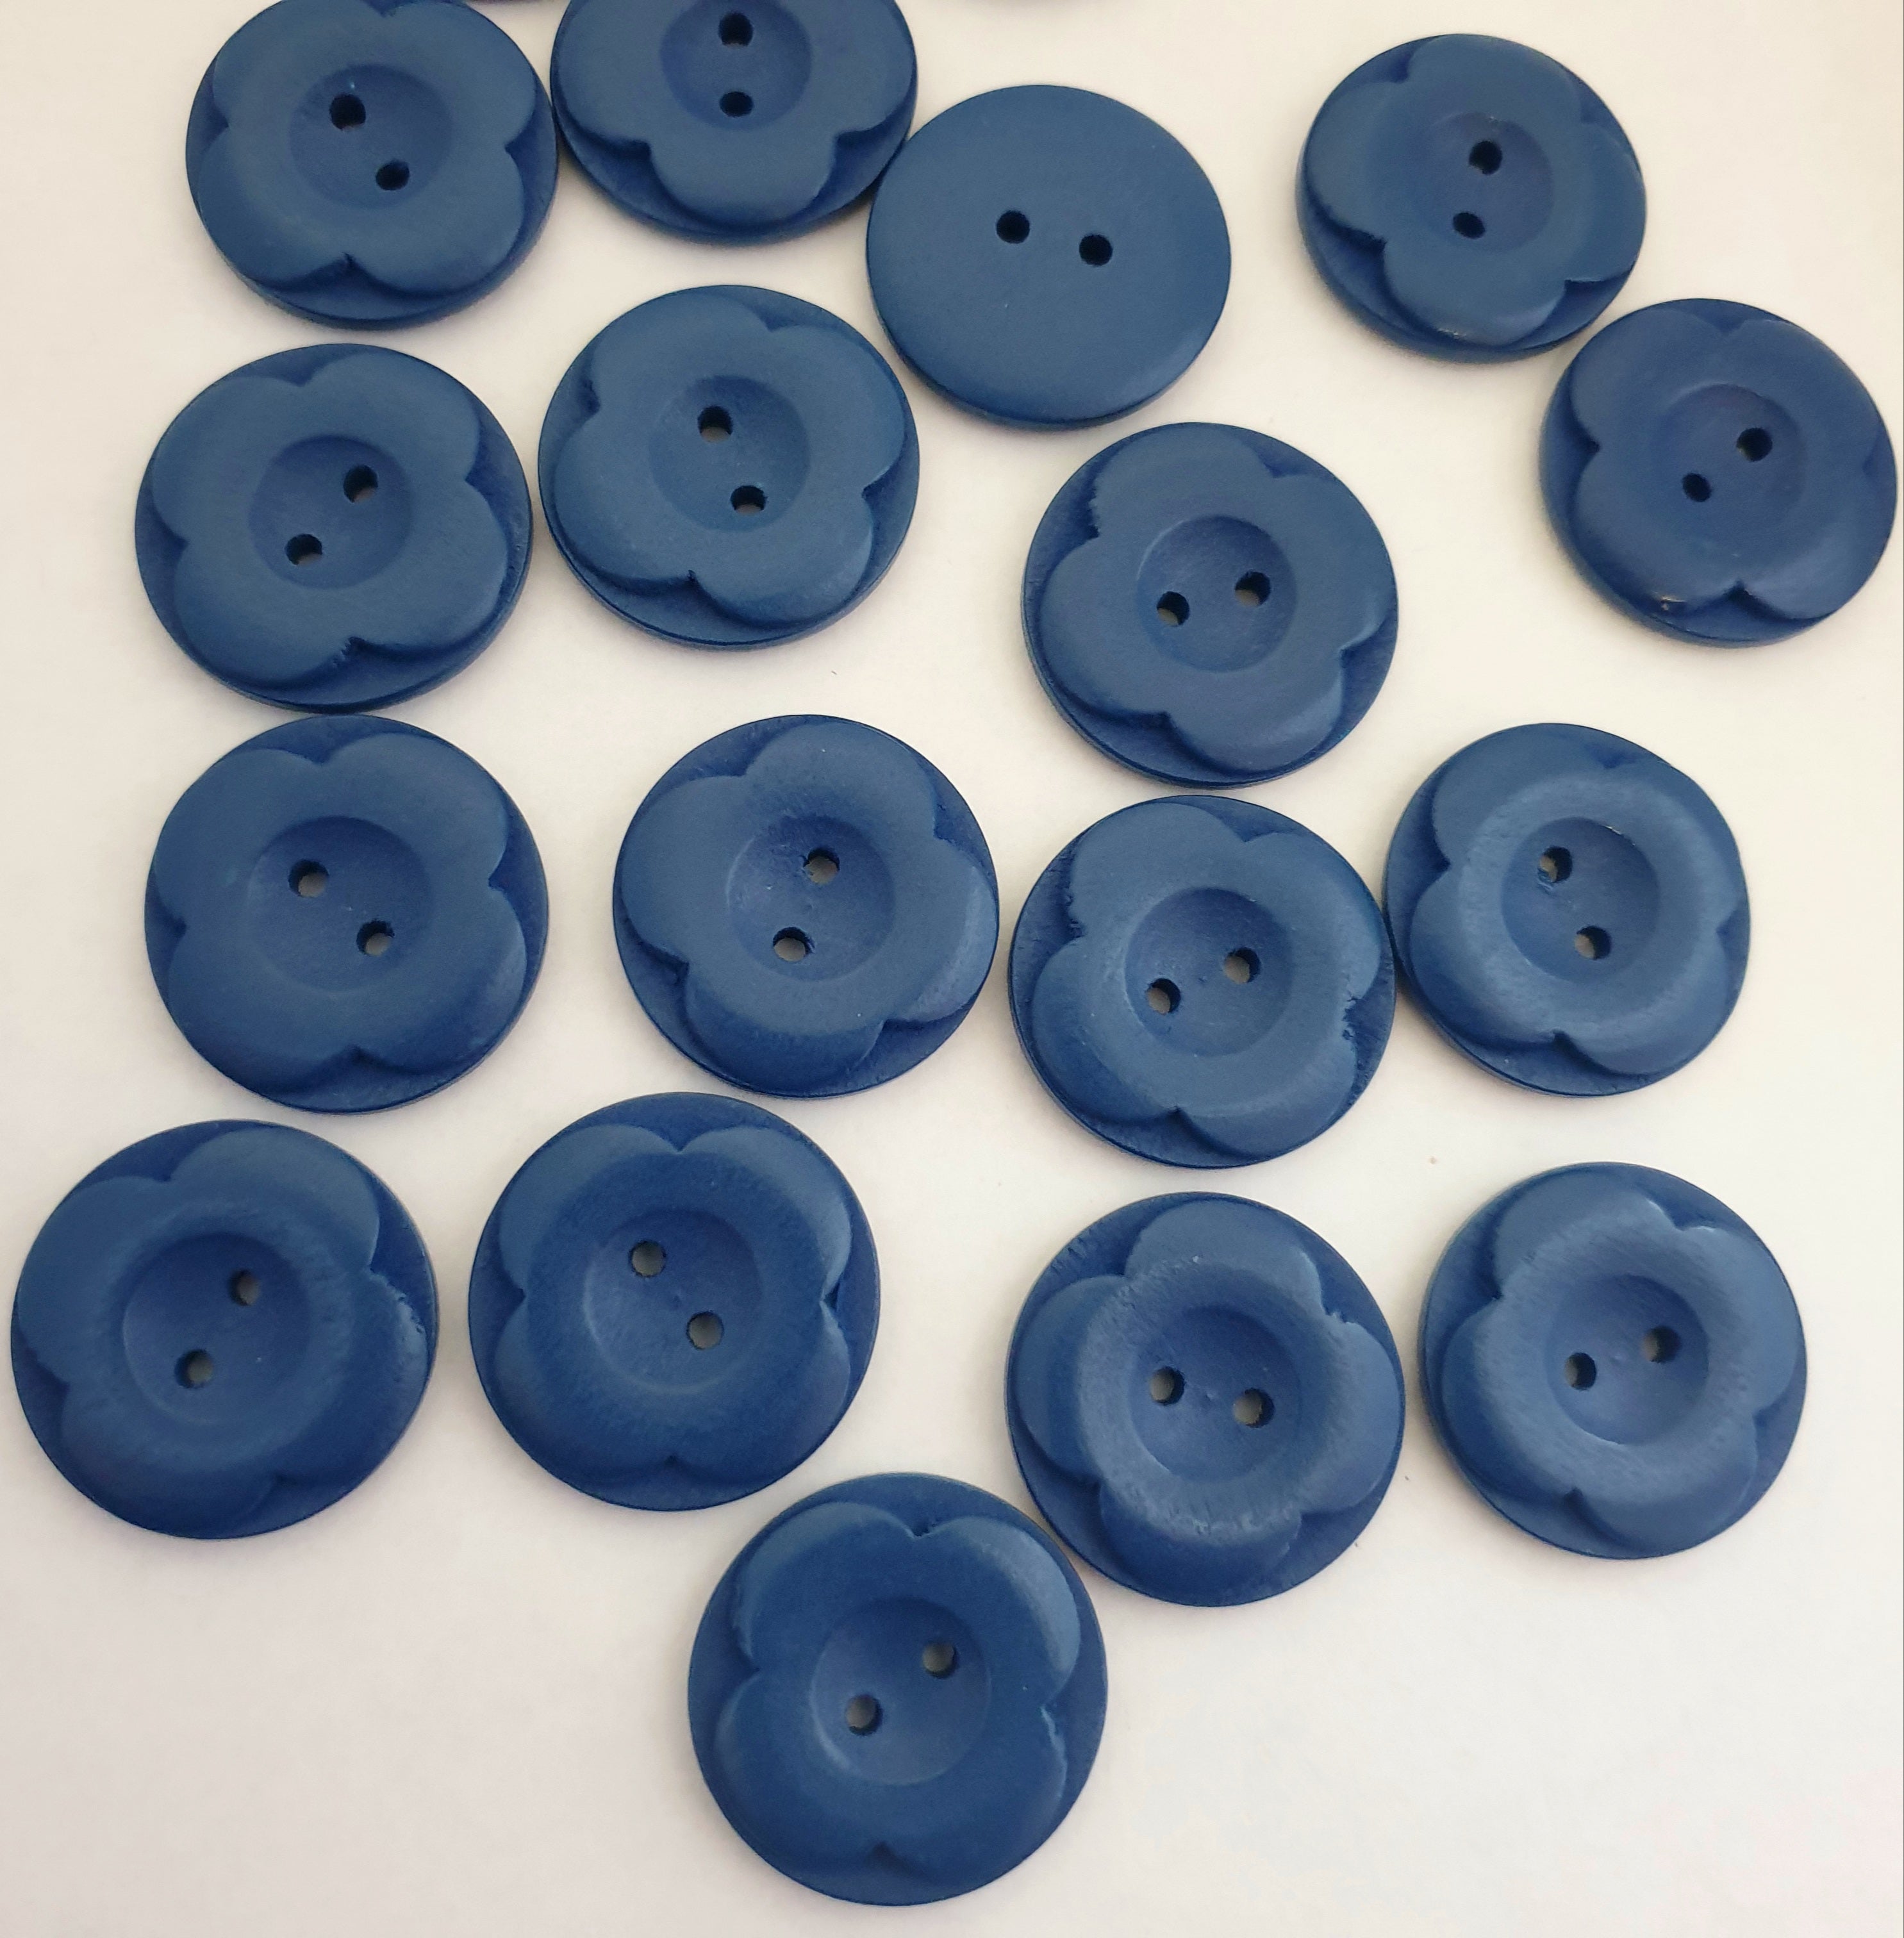 MajorCrafts 12pcs 25mm Aegean Blue Carved Flower 2 Holes Round Wood Sewing Buttons